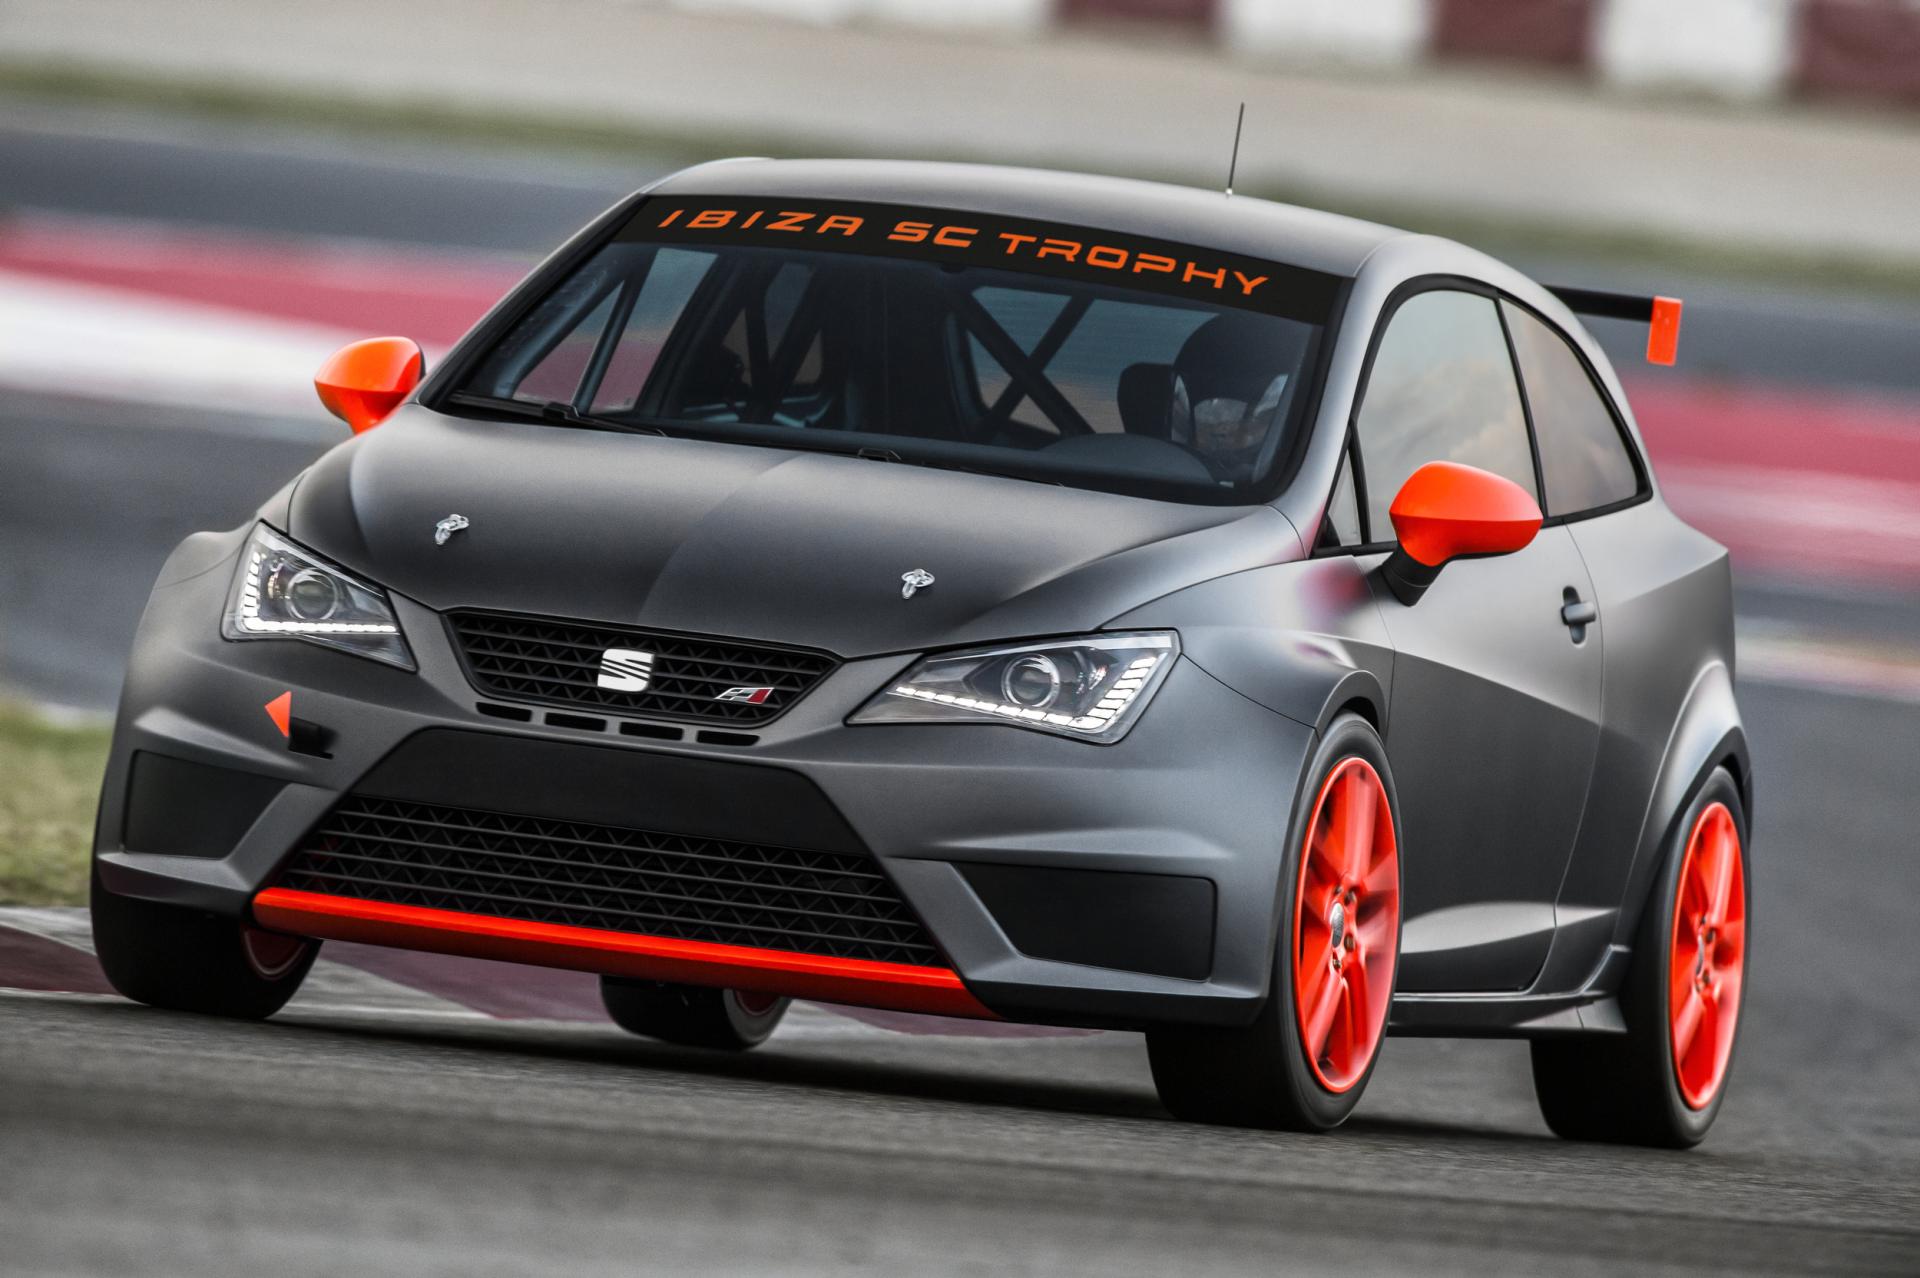 2013 Seat Ibiza Sc Trophy - Seat Ibiza Sc Trophy , HD Wallpaper & Backgrounds